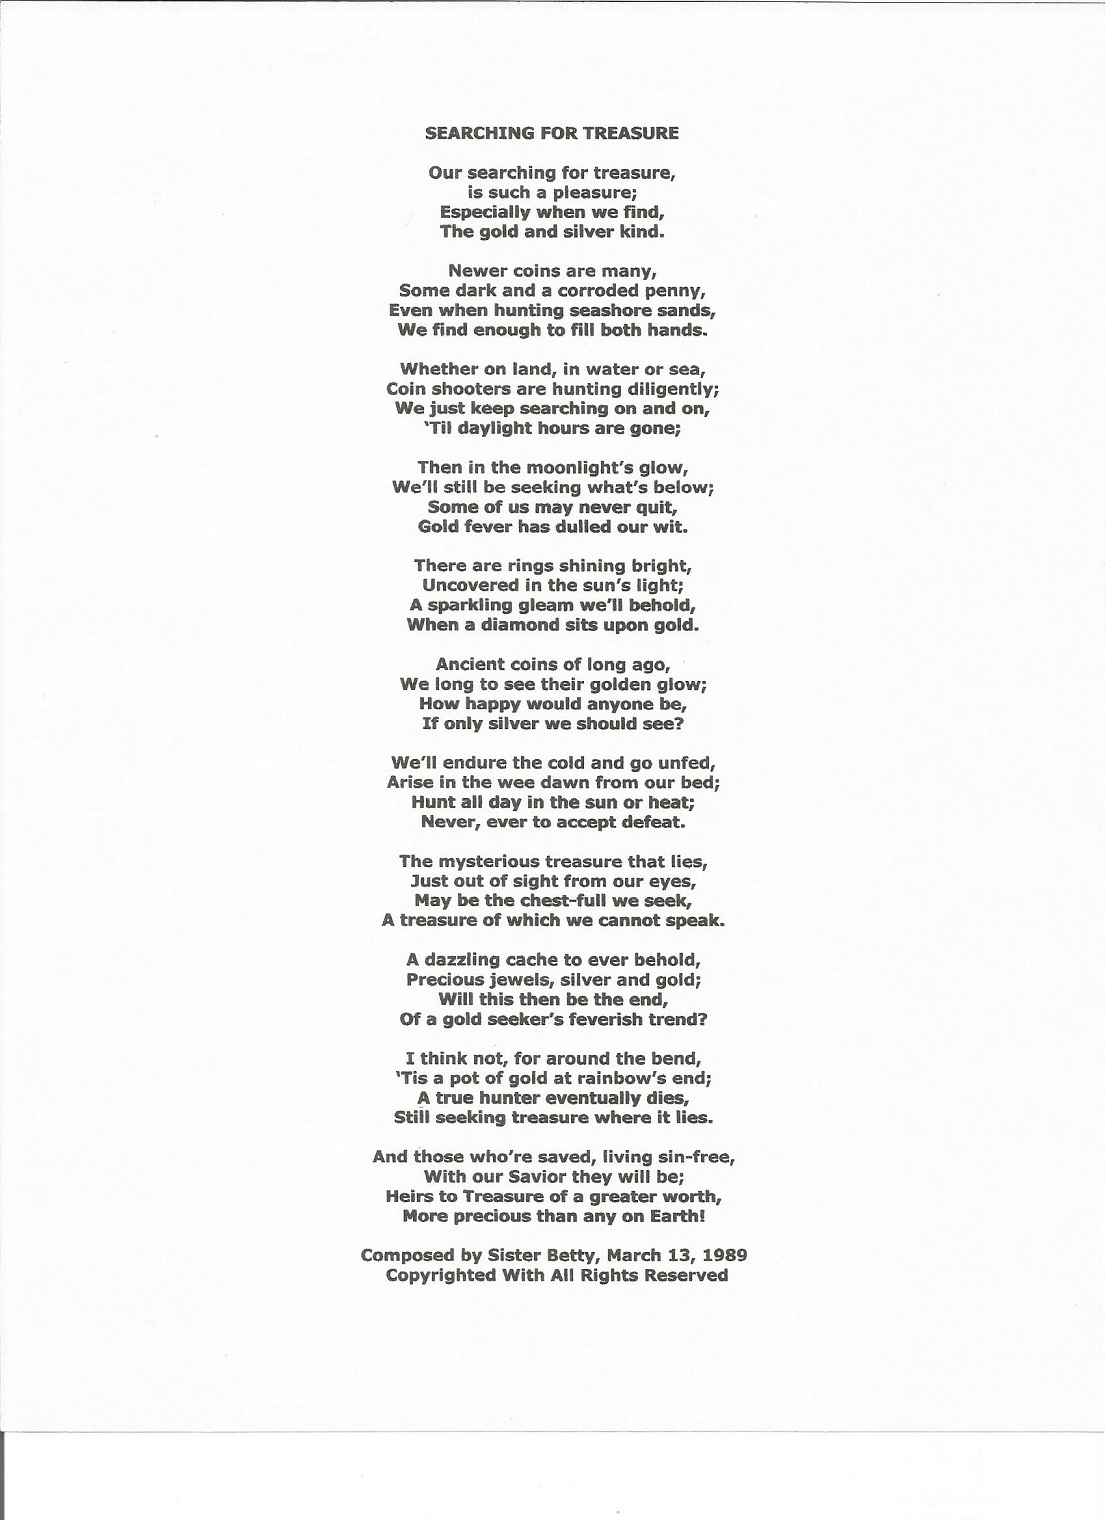 SEARCHING FOR TREASURE  Composed by Betty Huett  March 13, 1989.jpg